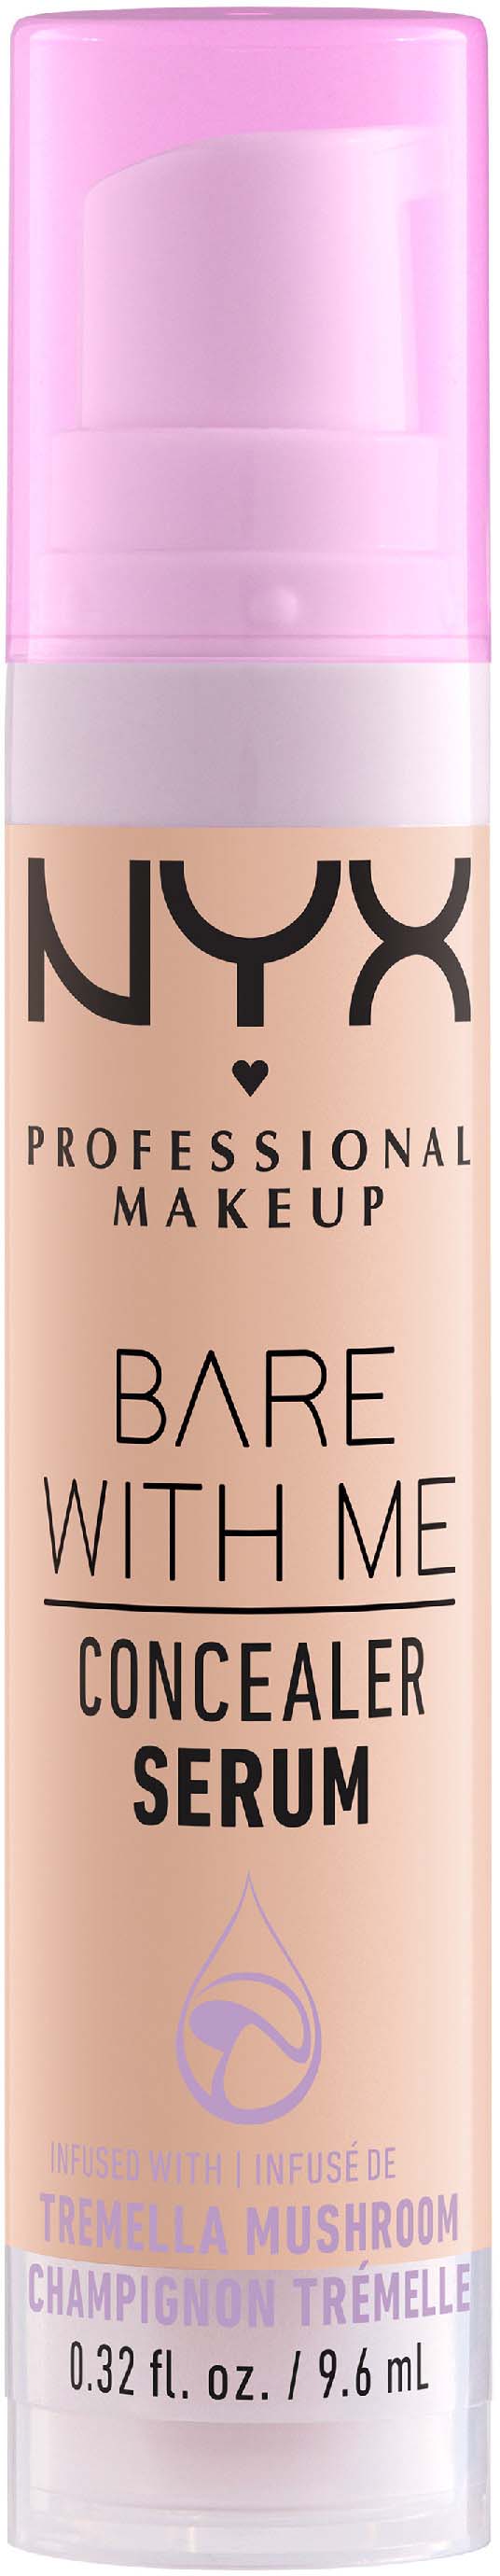 MAKEUP PROFESSIONAL NYX Me Serum Concealer Light Bare With